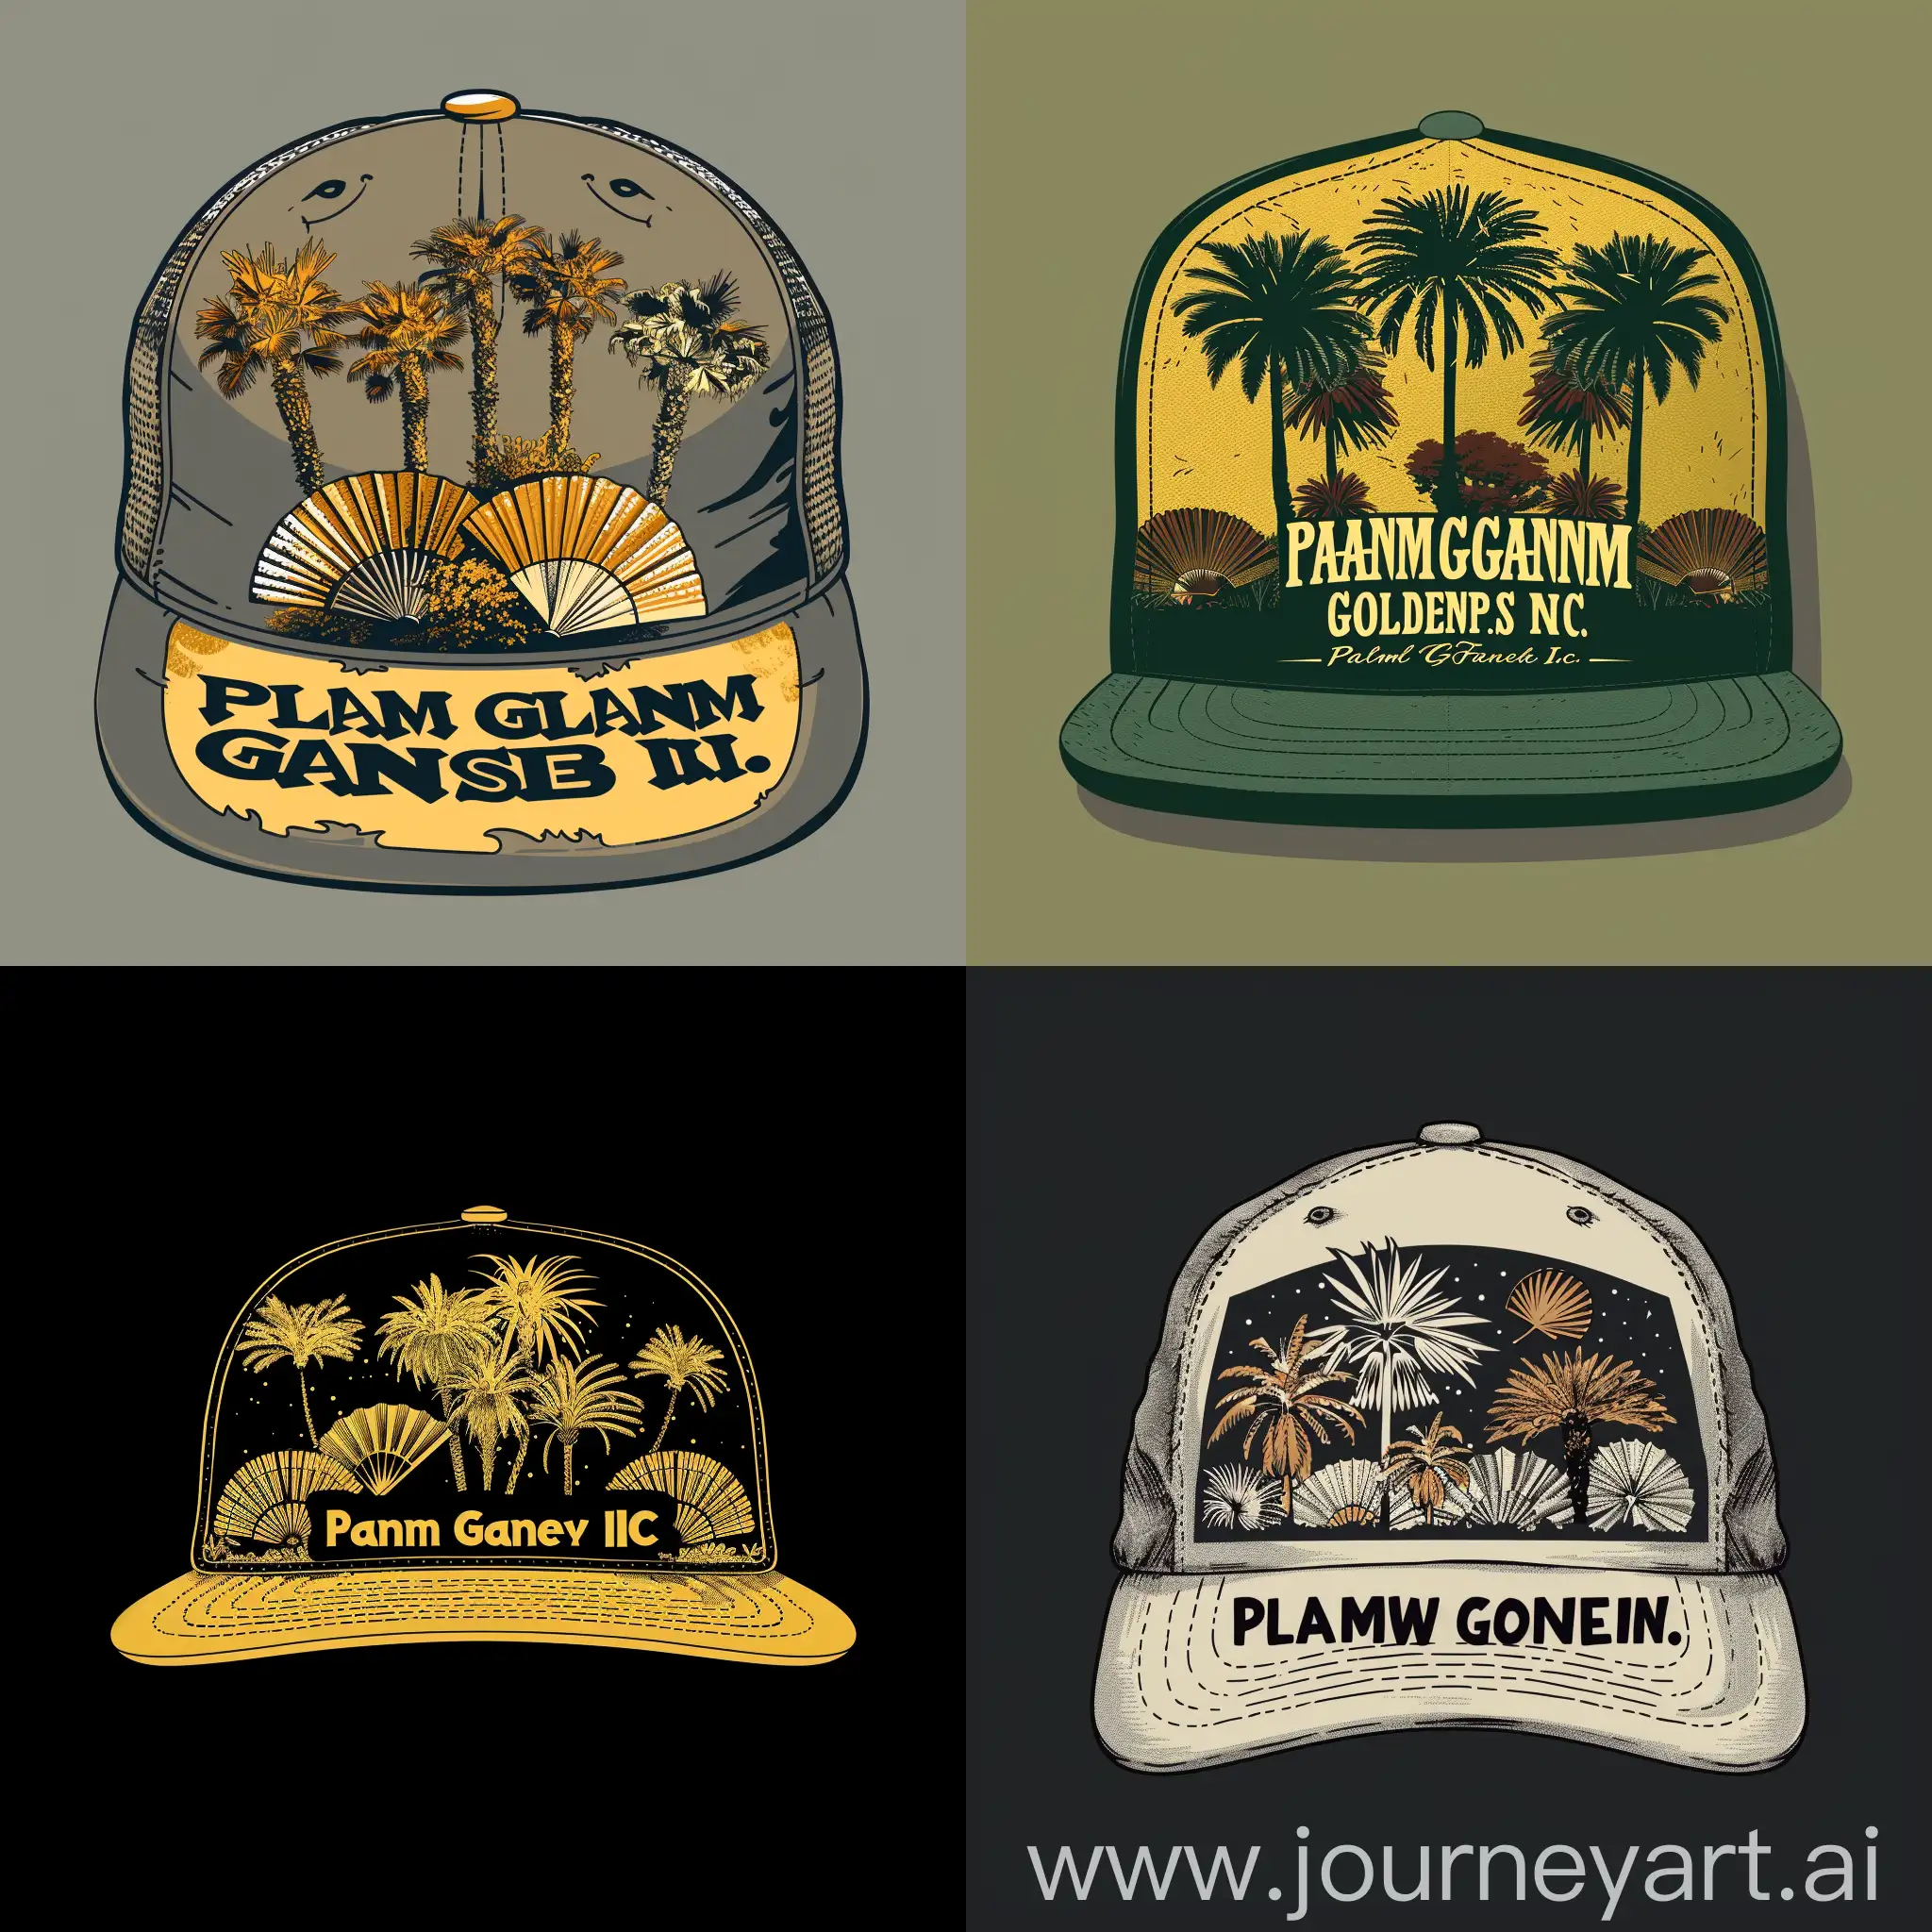 a hat logo for a tree farm that is called "Palm Gardens Inc.". Please incorporate sabal palm trees, Mediterranean fans and date palms